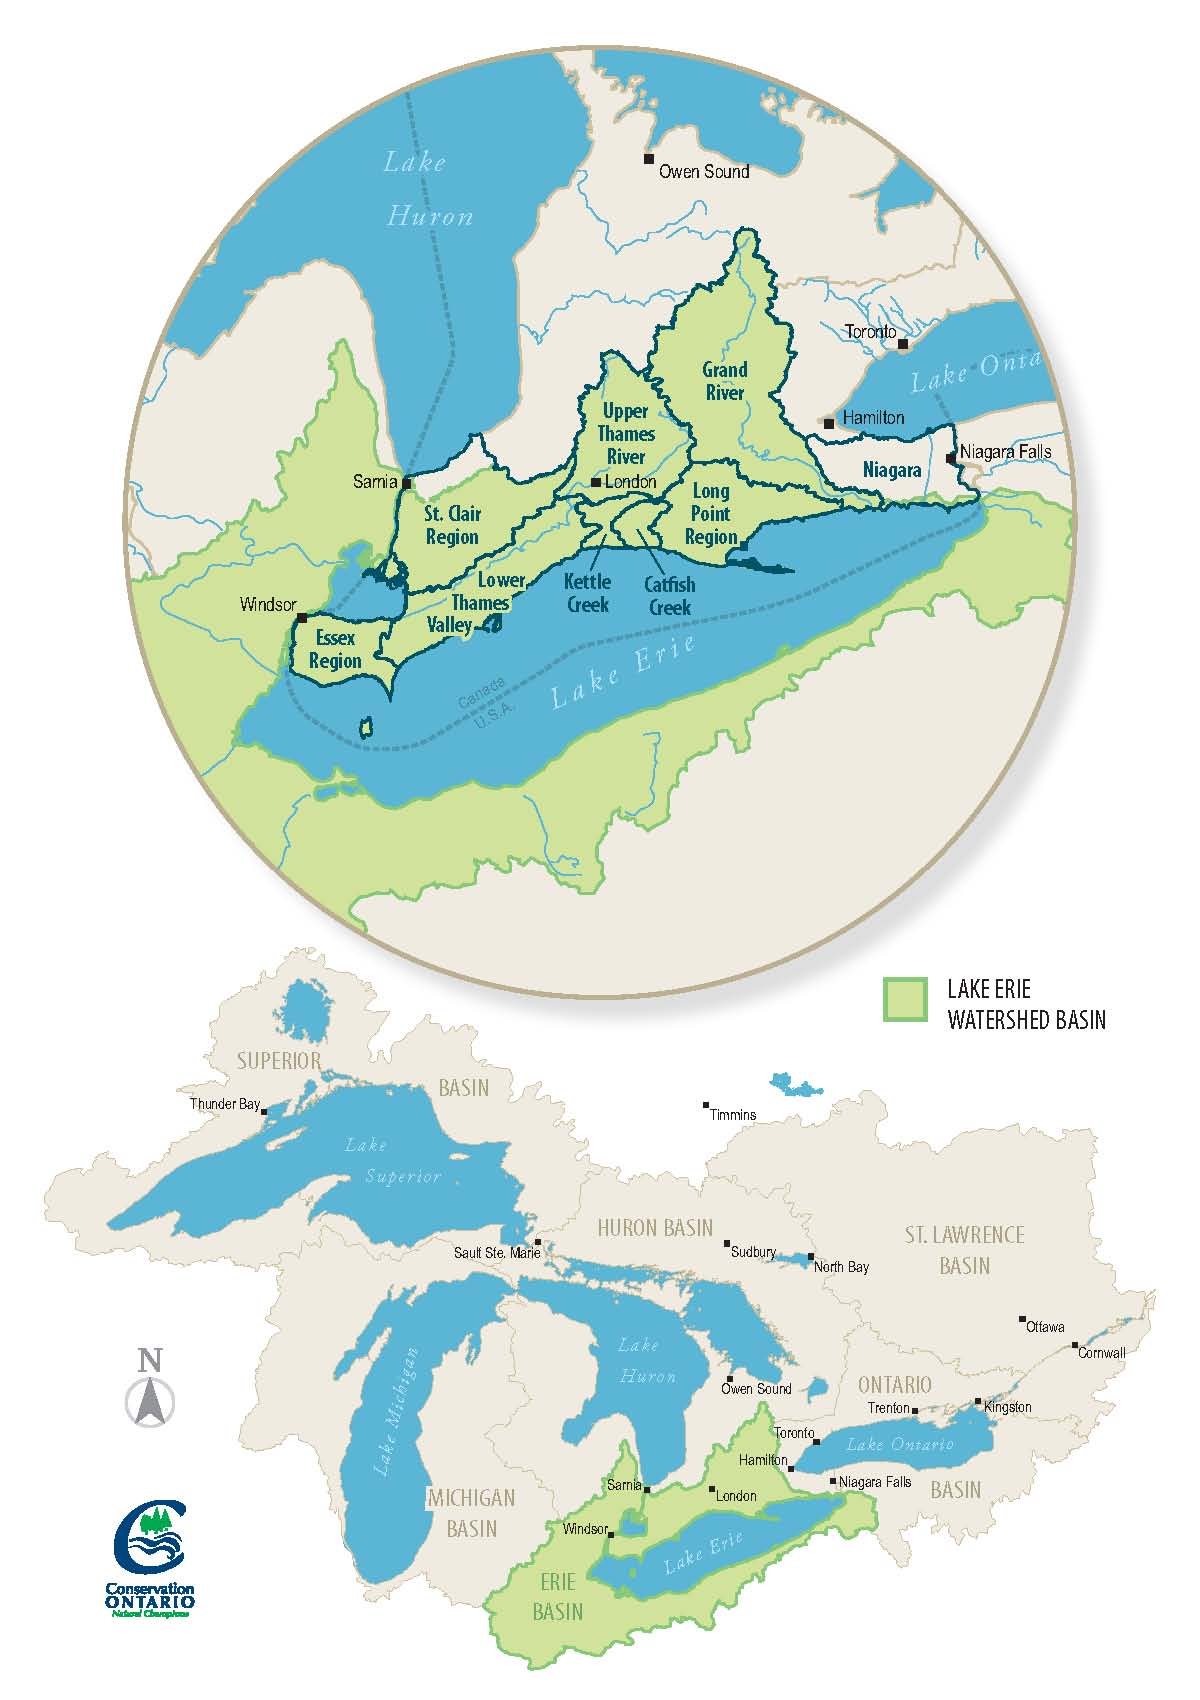 Map of Canadian Lake Erie watersheds and the Great Lakes basin